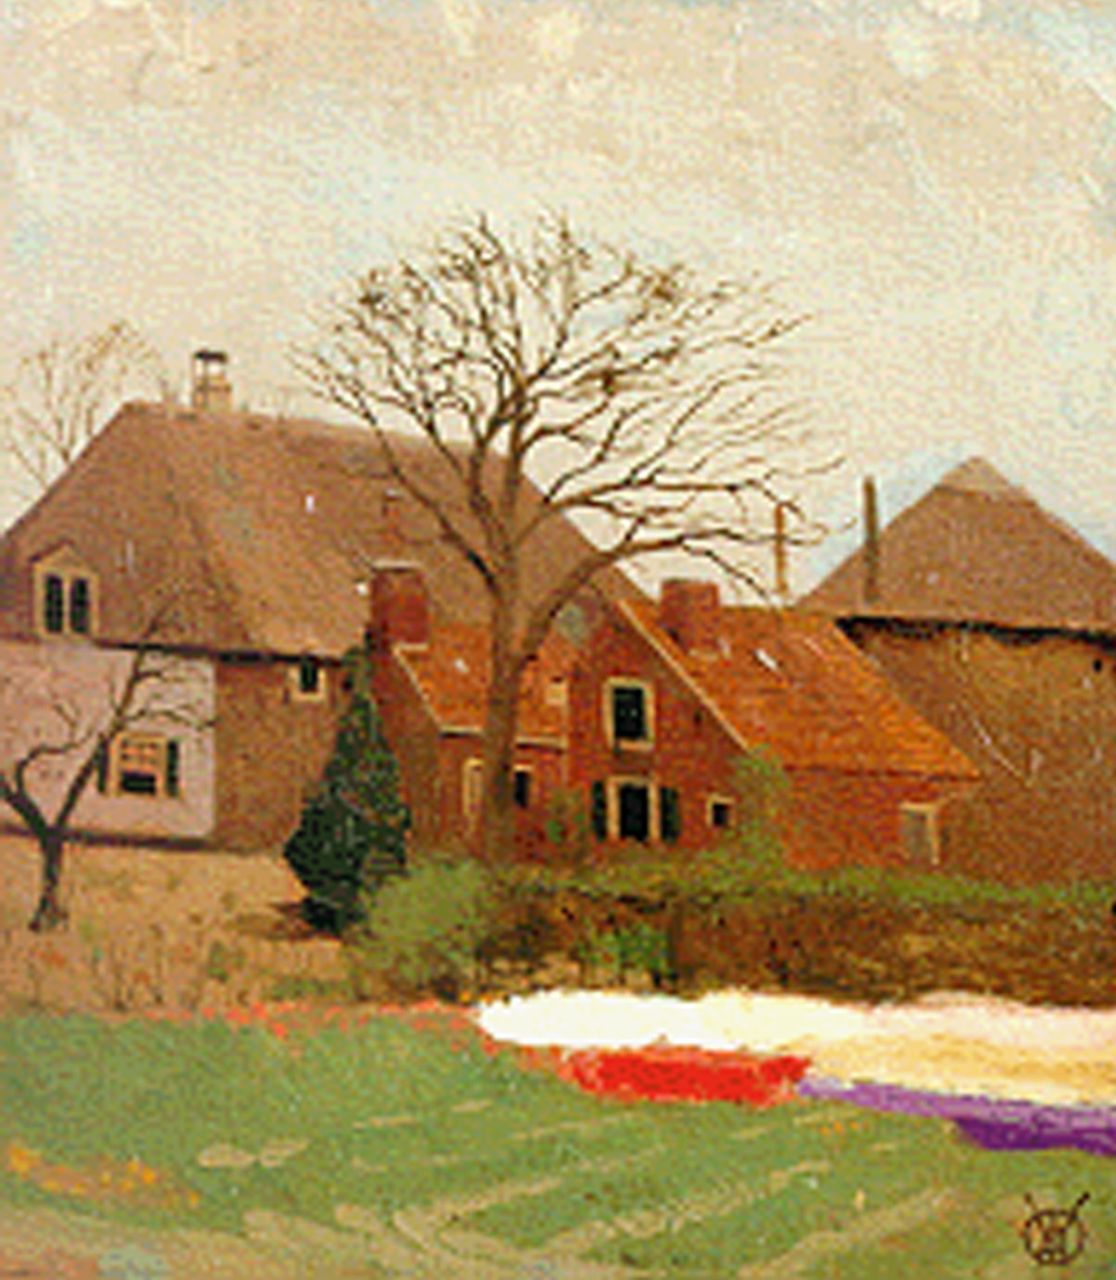 Dijsselhof G.W.  | Gerrit Willem Dijsselhof, The farm 'Bronstee' in Heemstede, oil on canvas laid down on panel 23.8 x 21.1 cm, signed l.r. with monogram and executed in 1906